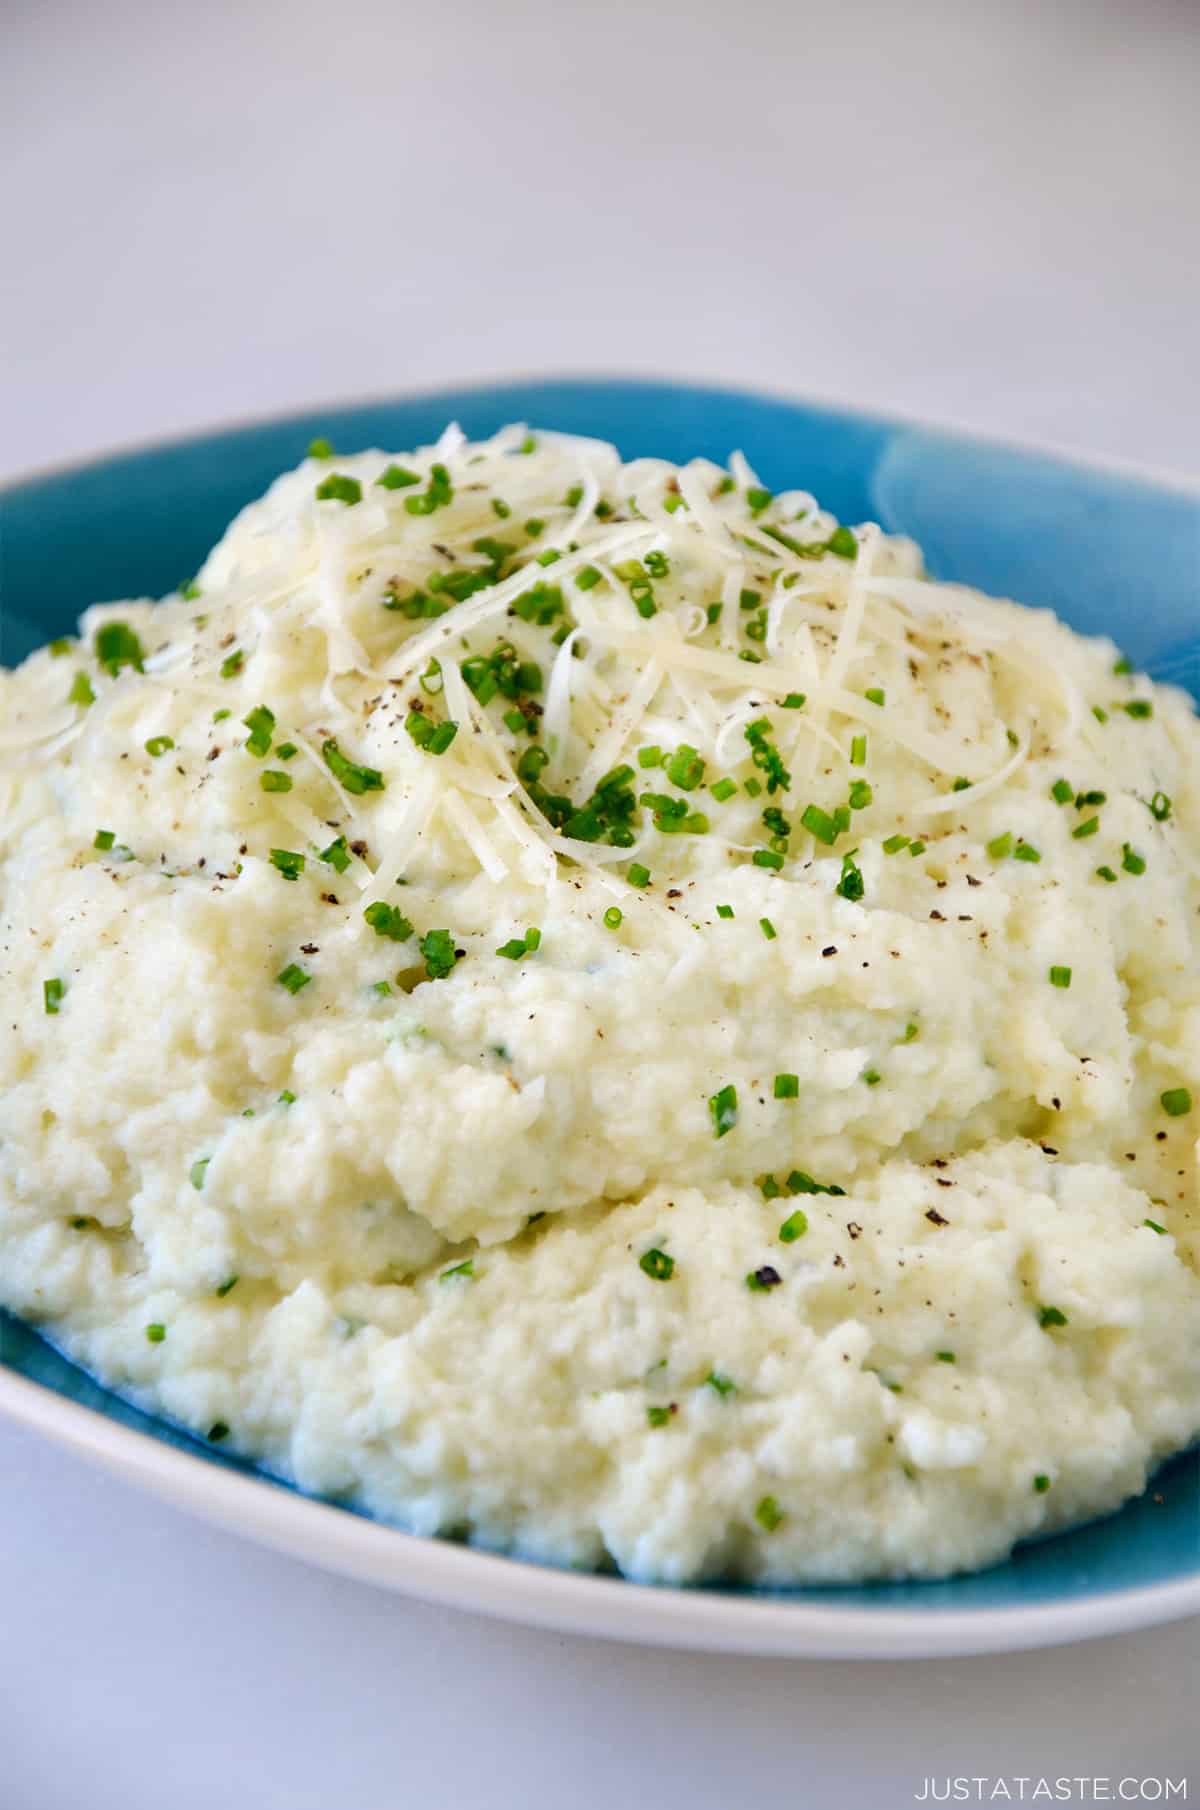 Mashed cauliflower topped with grated cheese, minced chives and black pepper in a bowl.